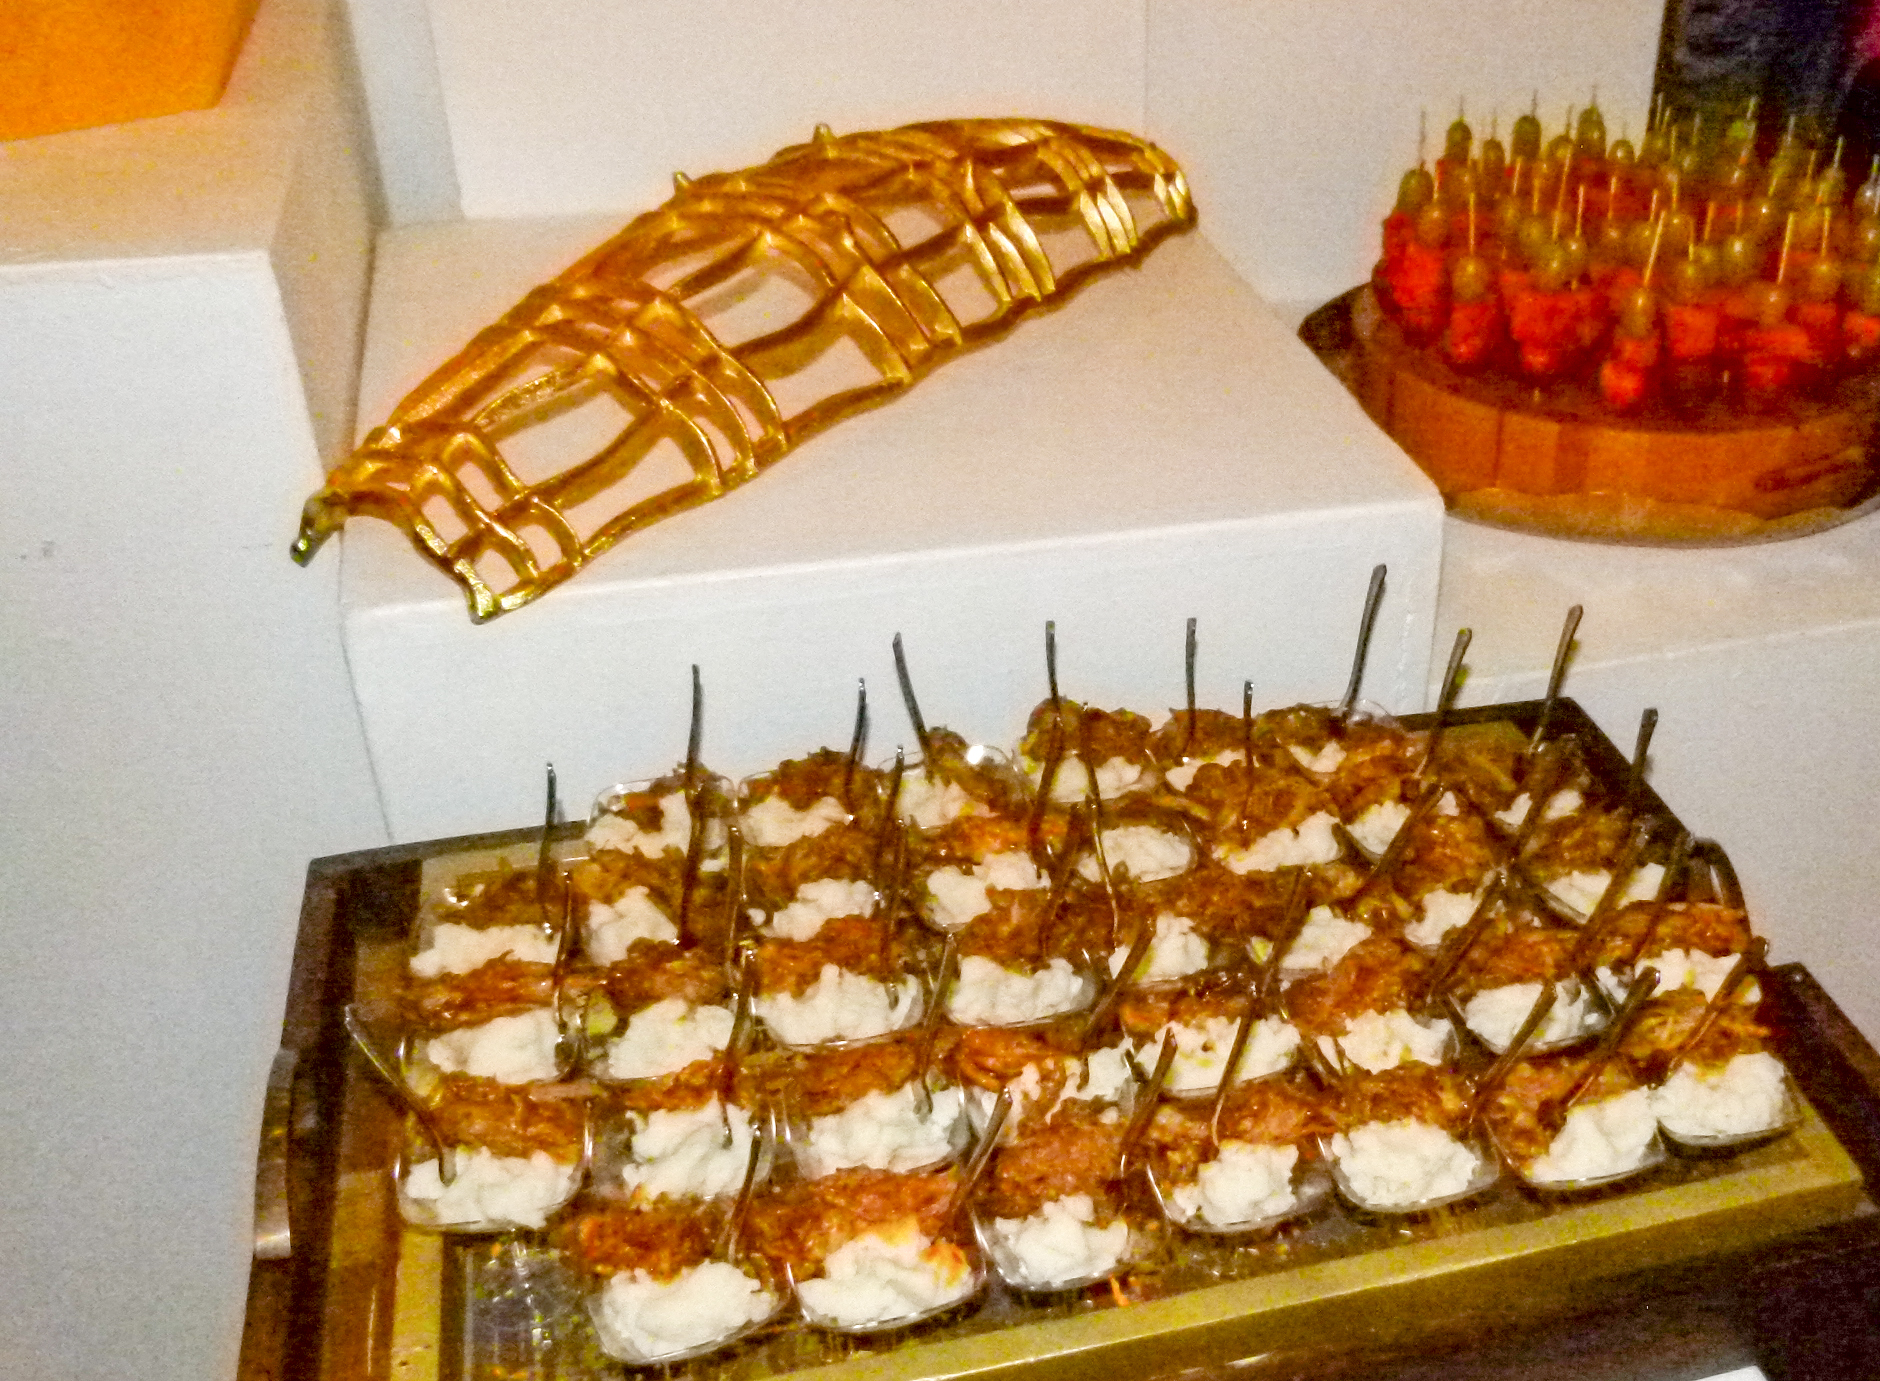 Delectable dessert offerings in the VIP room.